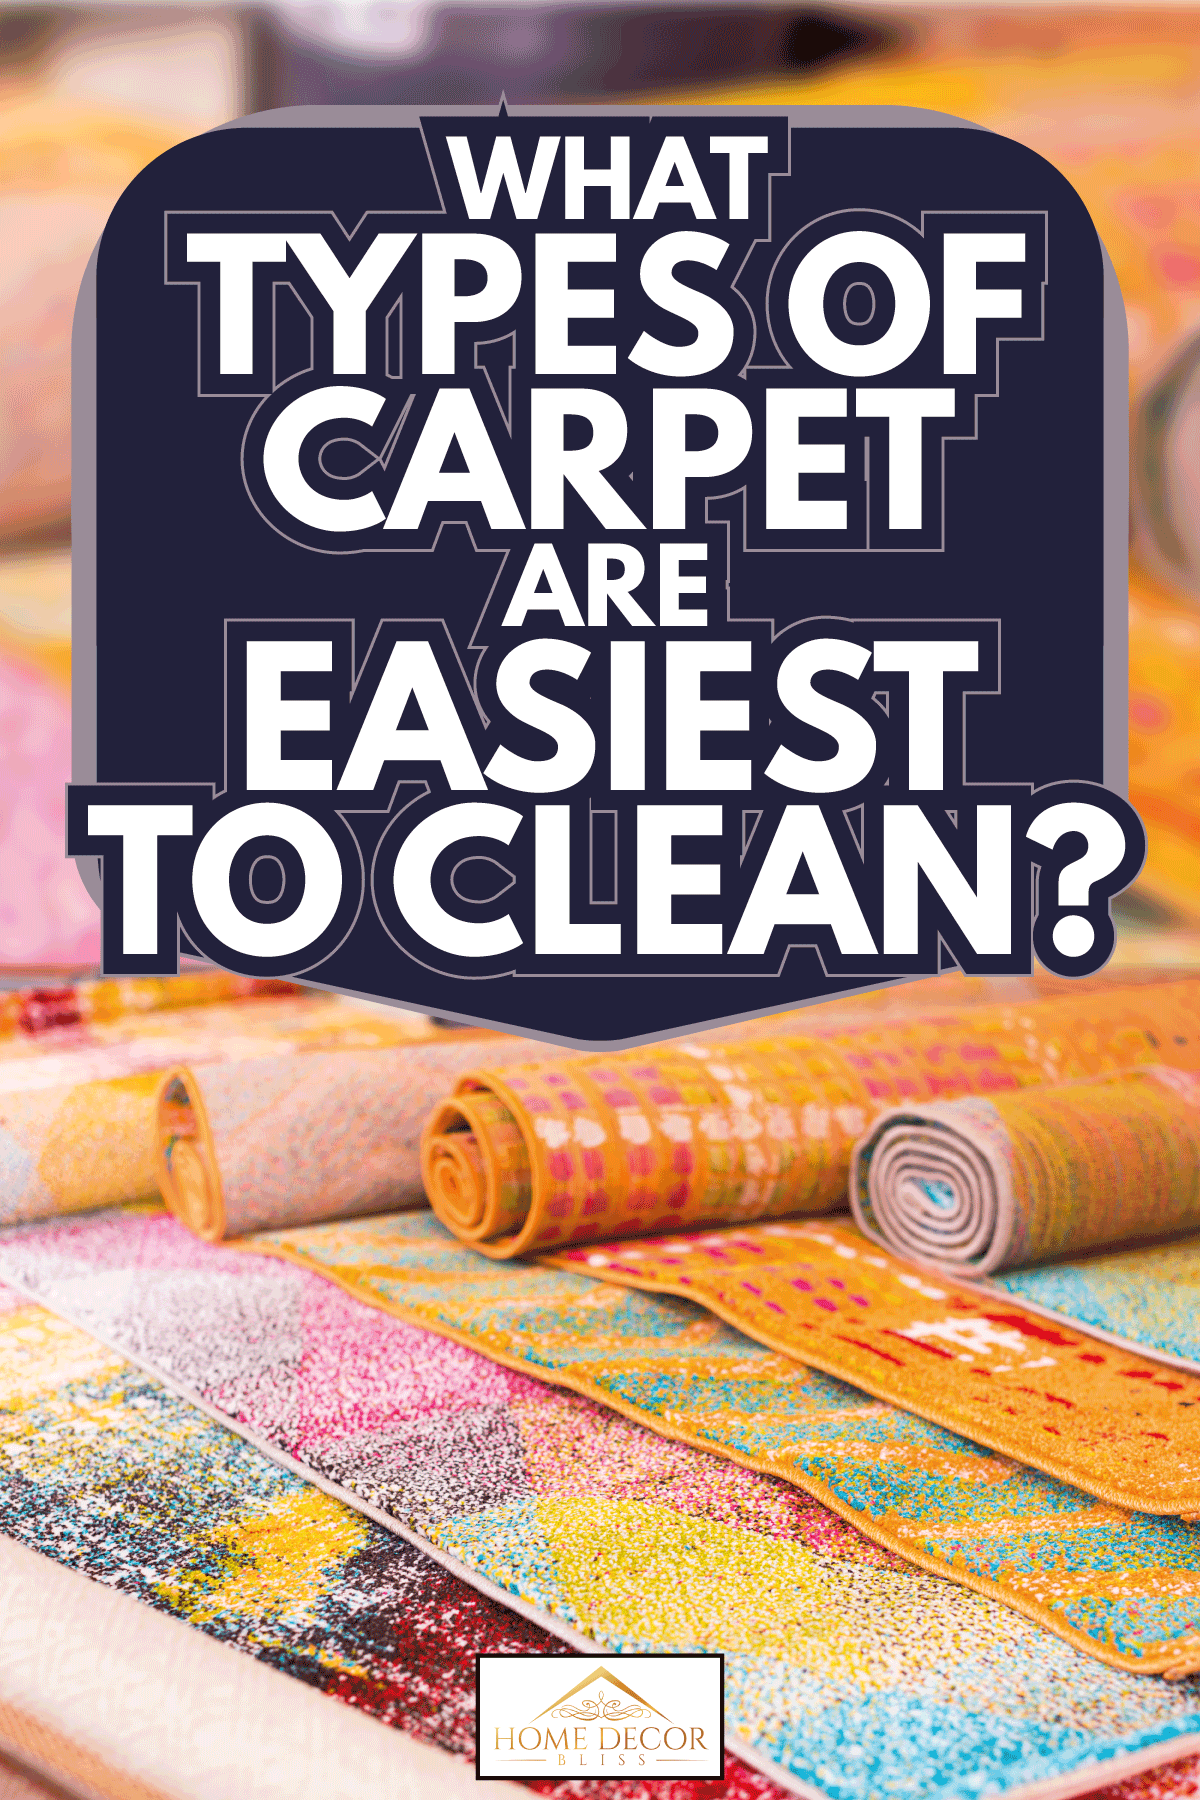 diversity of colour carpets in the store for home decor. What Types Of Carpet Are Easiest To Clean